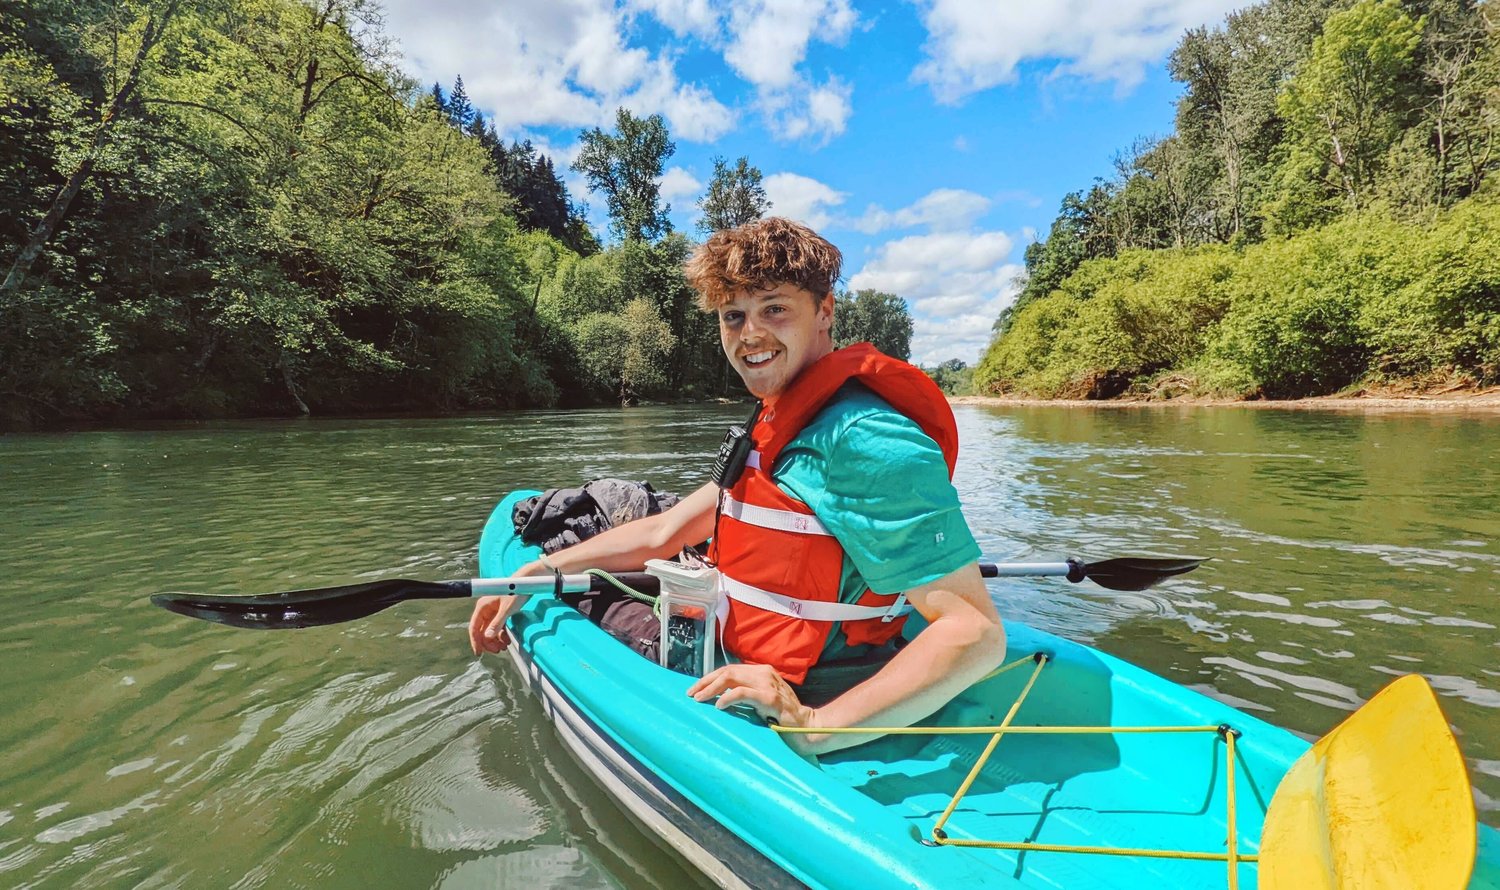 Photojournalist Jared Wenzelburger smiles and looks on from his kayak as reporter Isabel Vander Stoep snaps a photo along the Chehalis River on Wednesday.